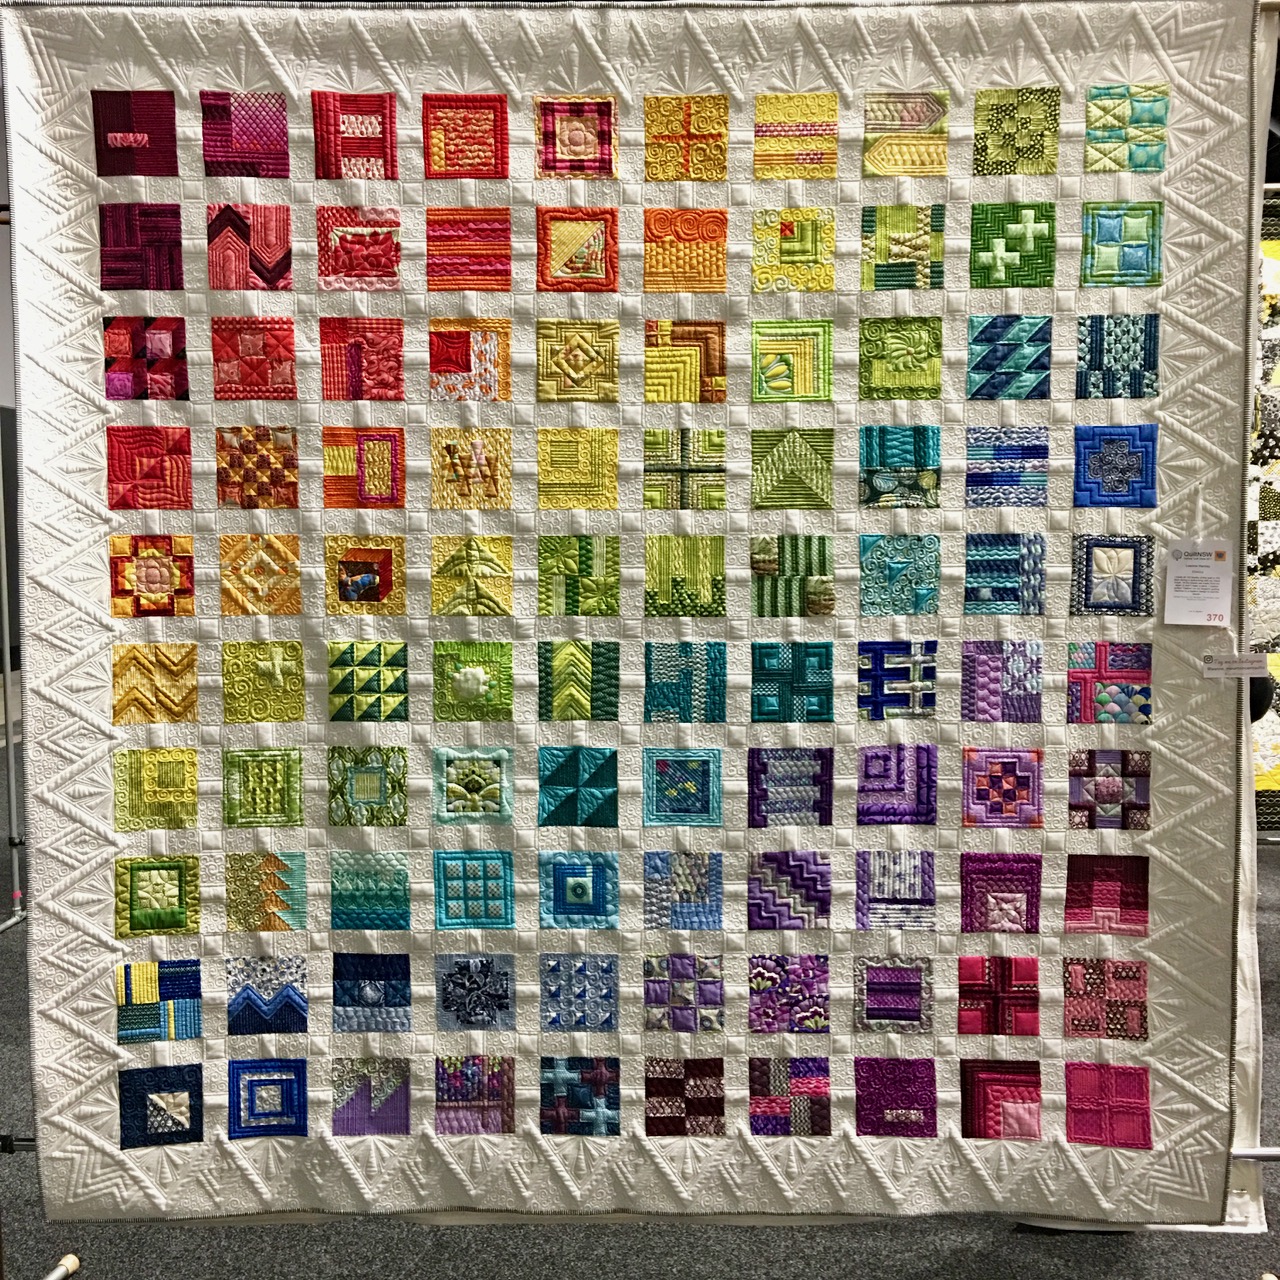 More amazing quilts from the 2017 Sydney Quilt Show